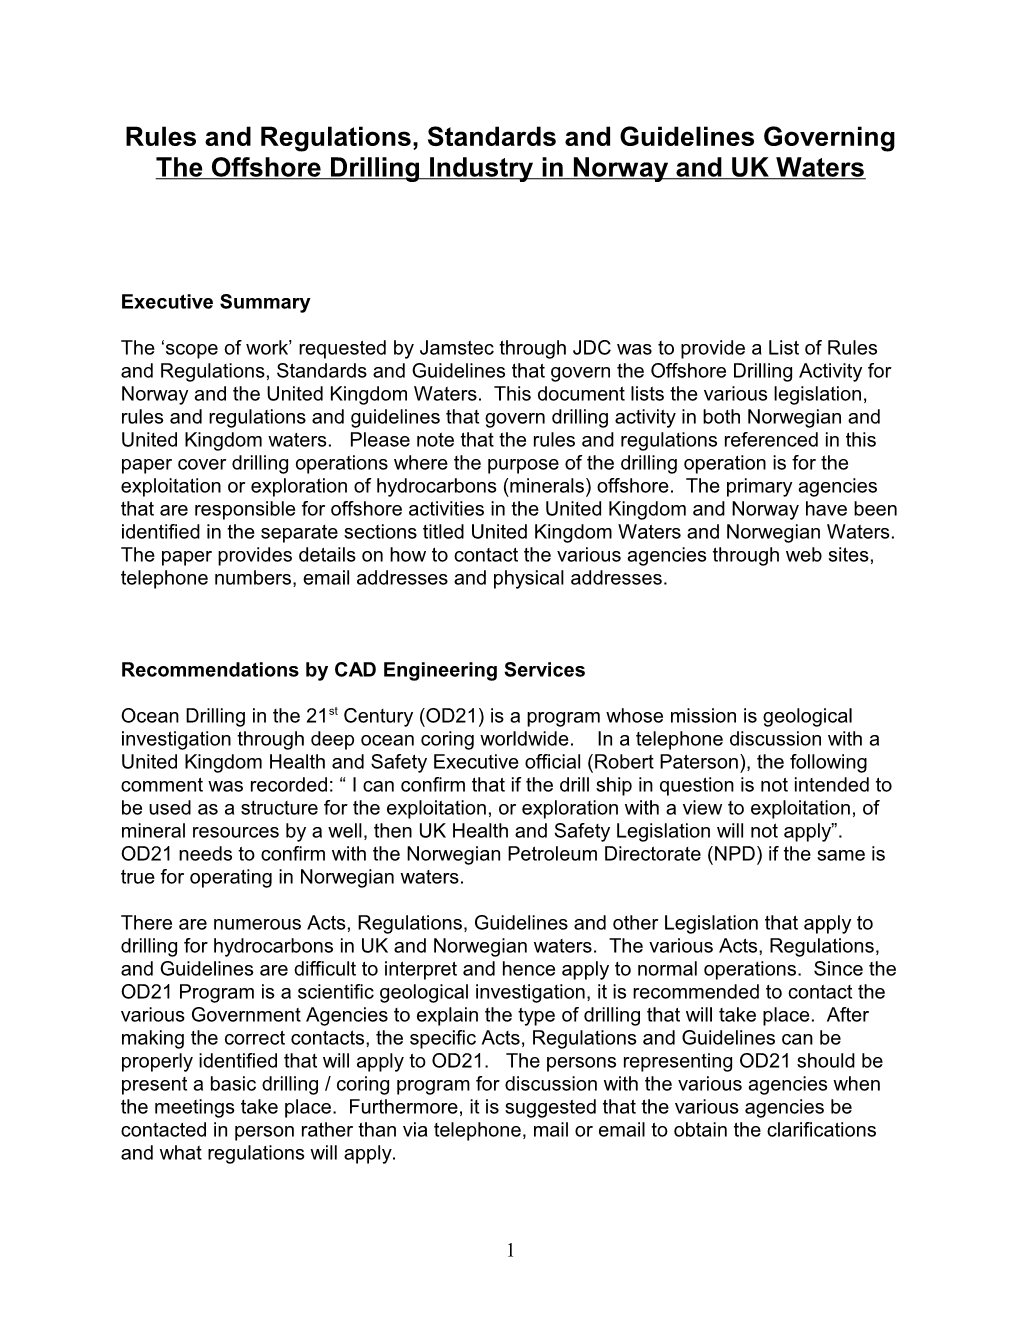 Rules and Regulations, Standards and Guidelines Governing the Offshore Drilling Industry